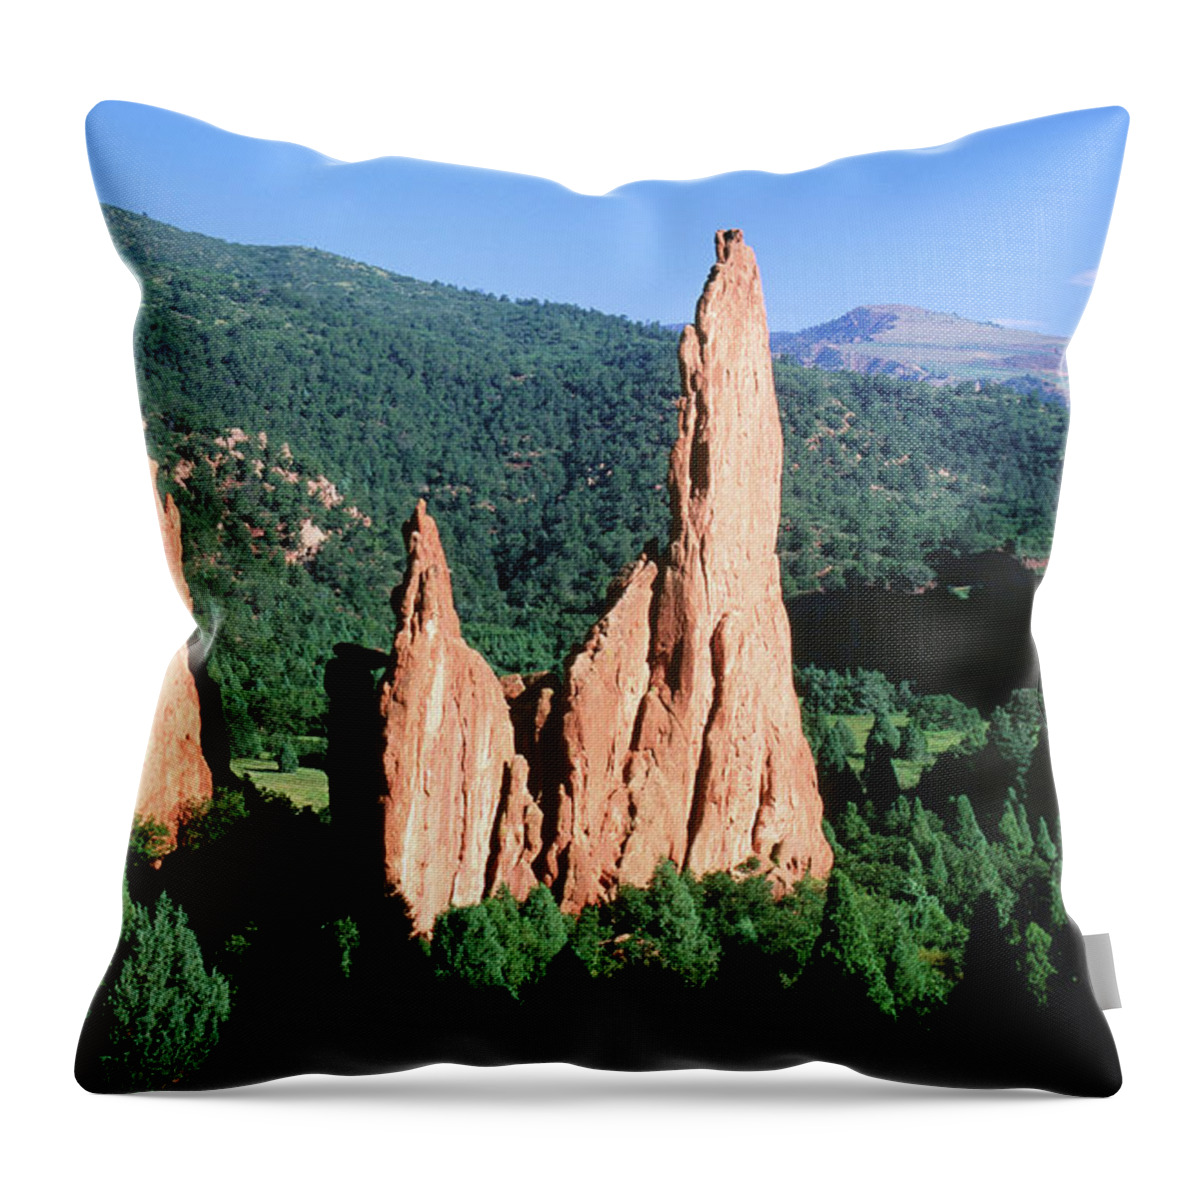 Scenics Throw Pillow featuring the photograph Rock Formations, Garden Of The Gods by John Elk